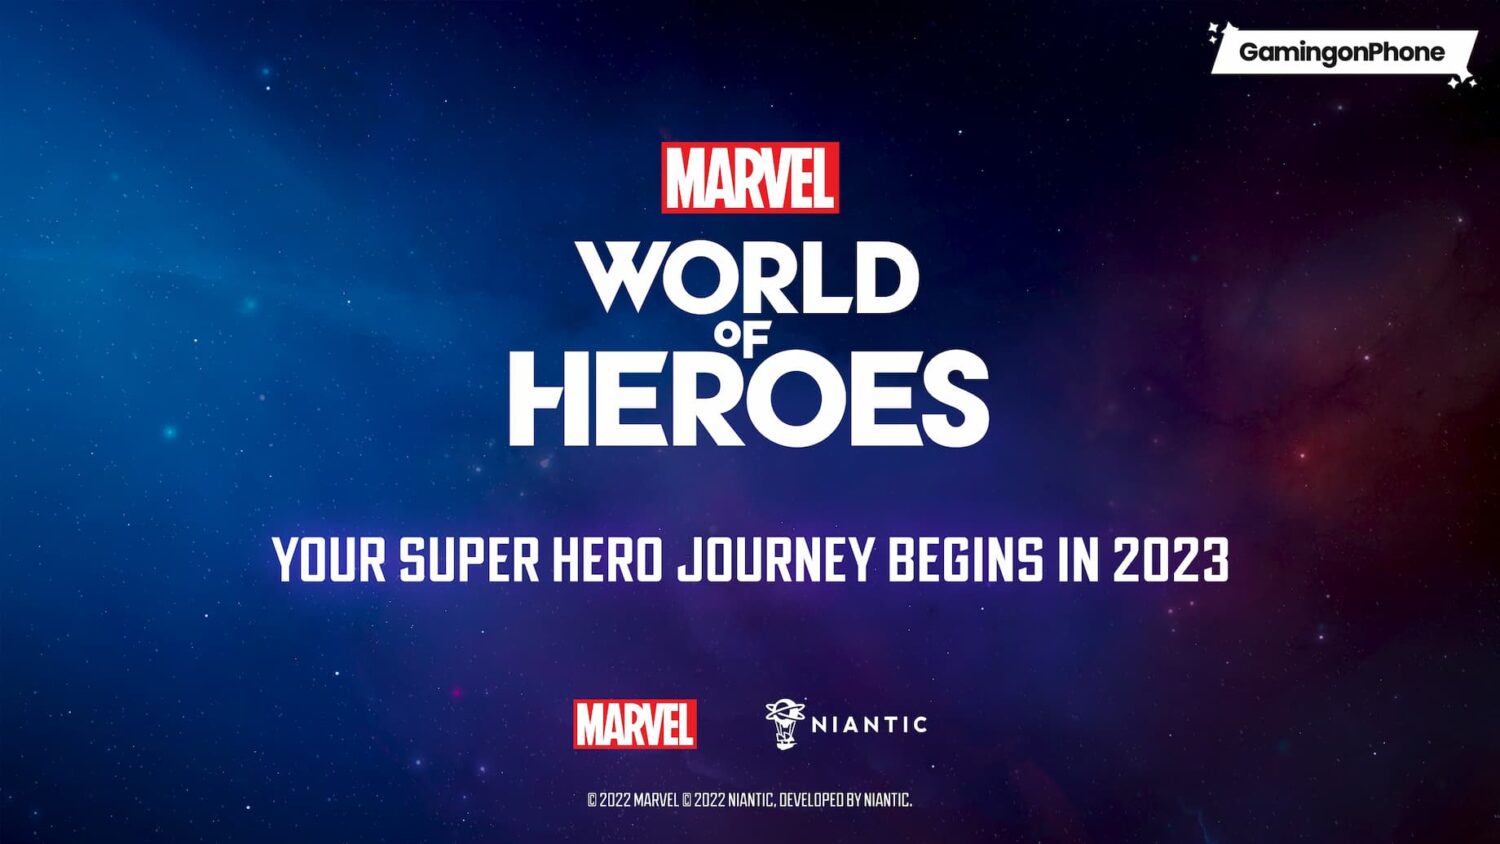 MARVEL World of Heroes announced